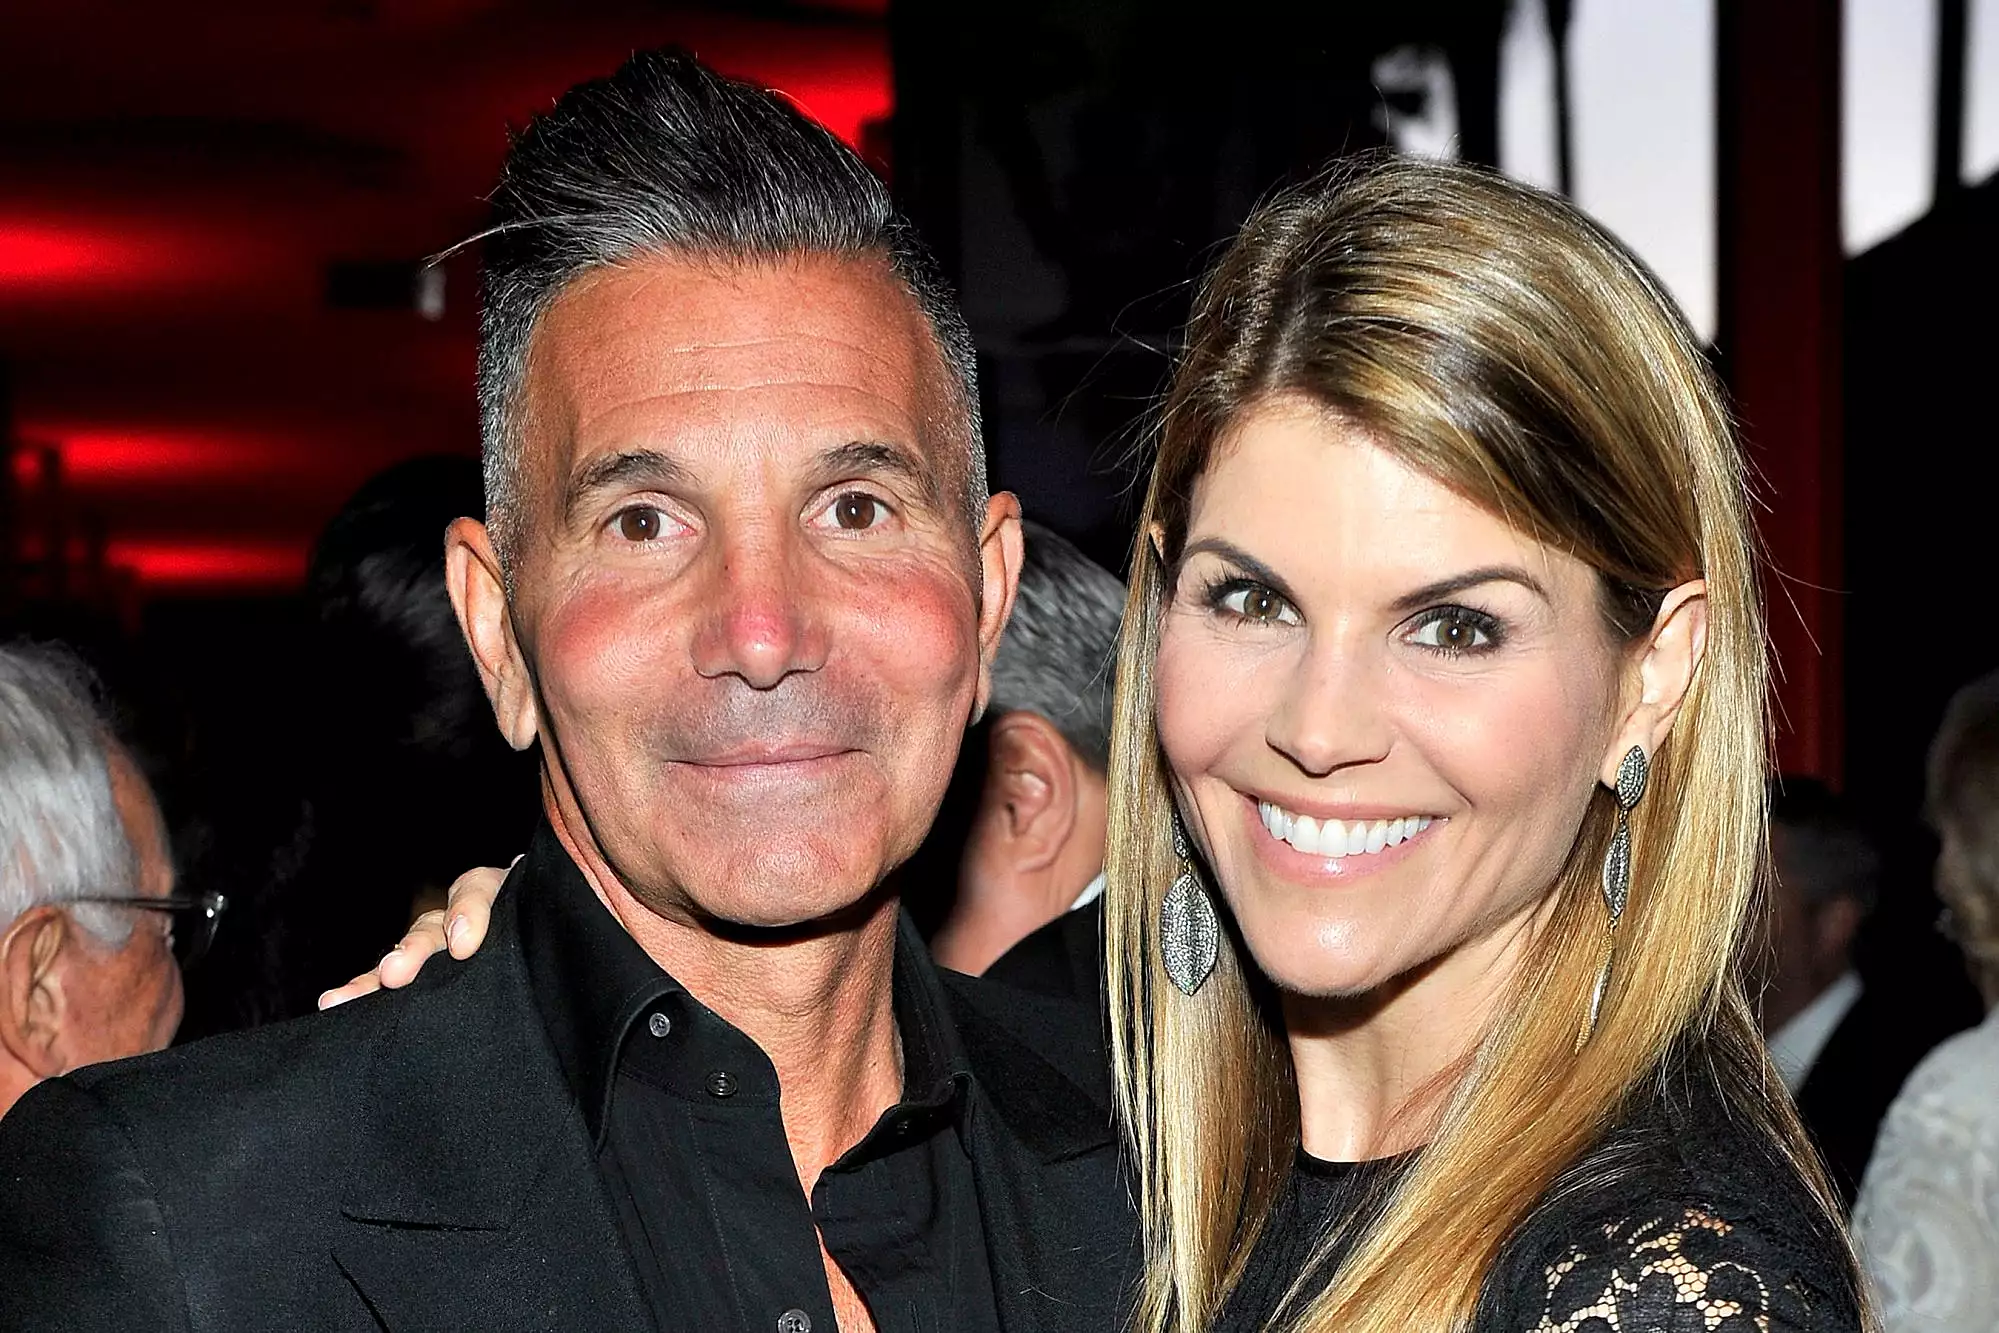 Lori Loughlin Was the 'Last' Full House Cast Member Dave Coulier Expected to Go to Jail